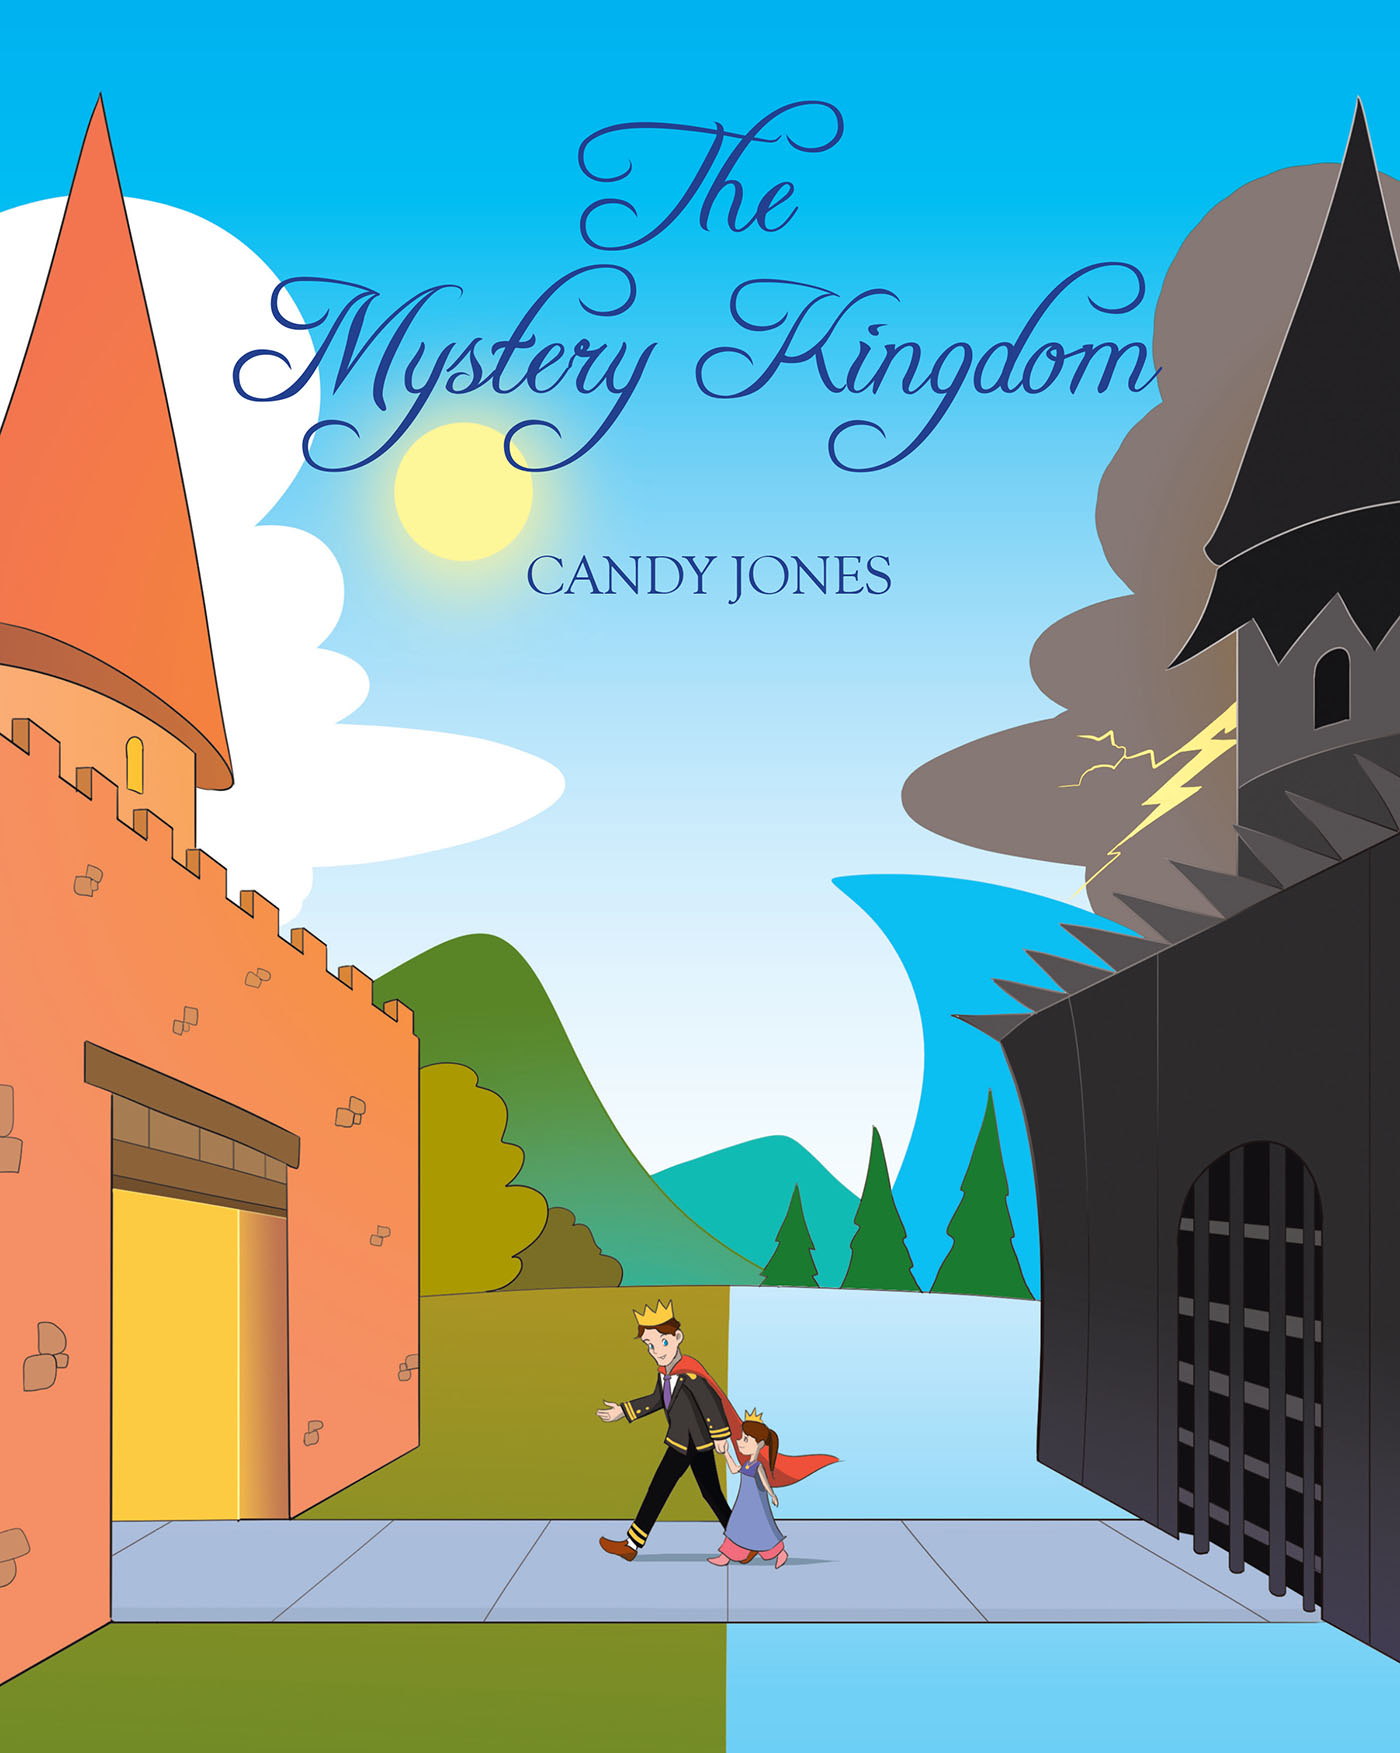 Author Candy Jones’s New Book, "The Mystery Kingdom," is the Exhilarating Story of Twin Sisters Who Hold the Special Power Needed to Break a Dark Curse on Their Homeland